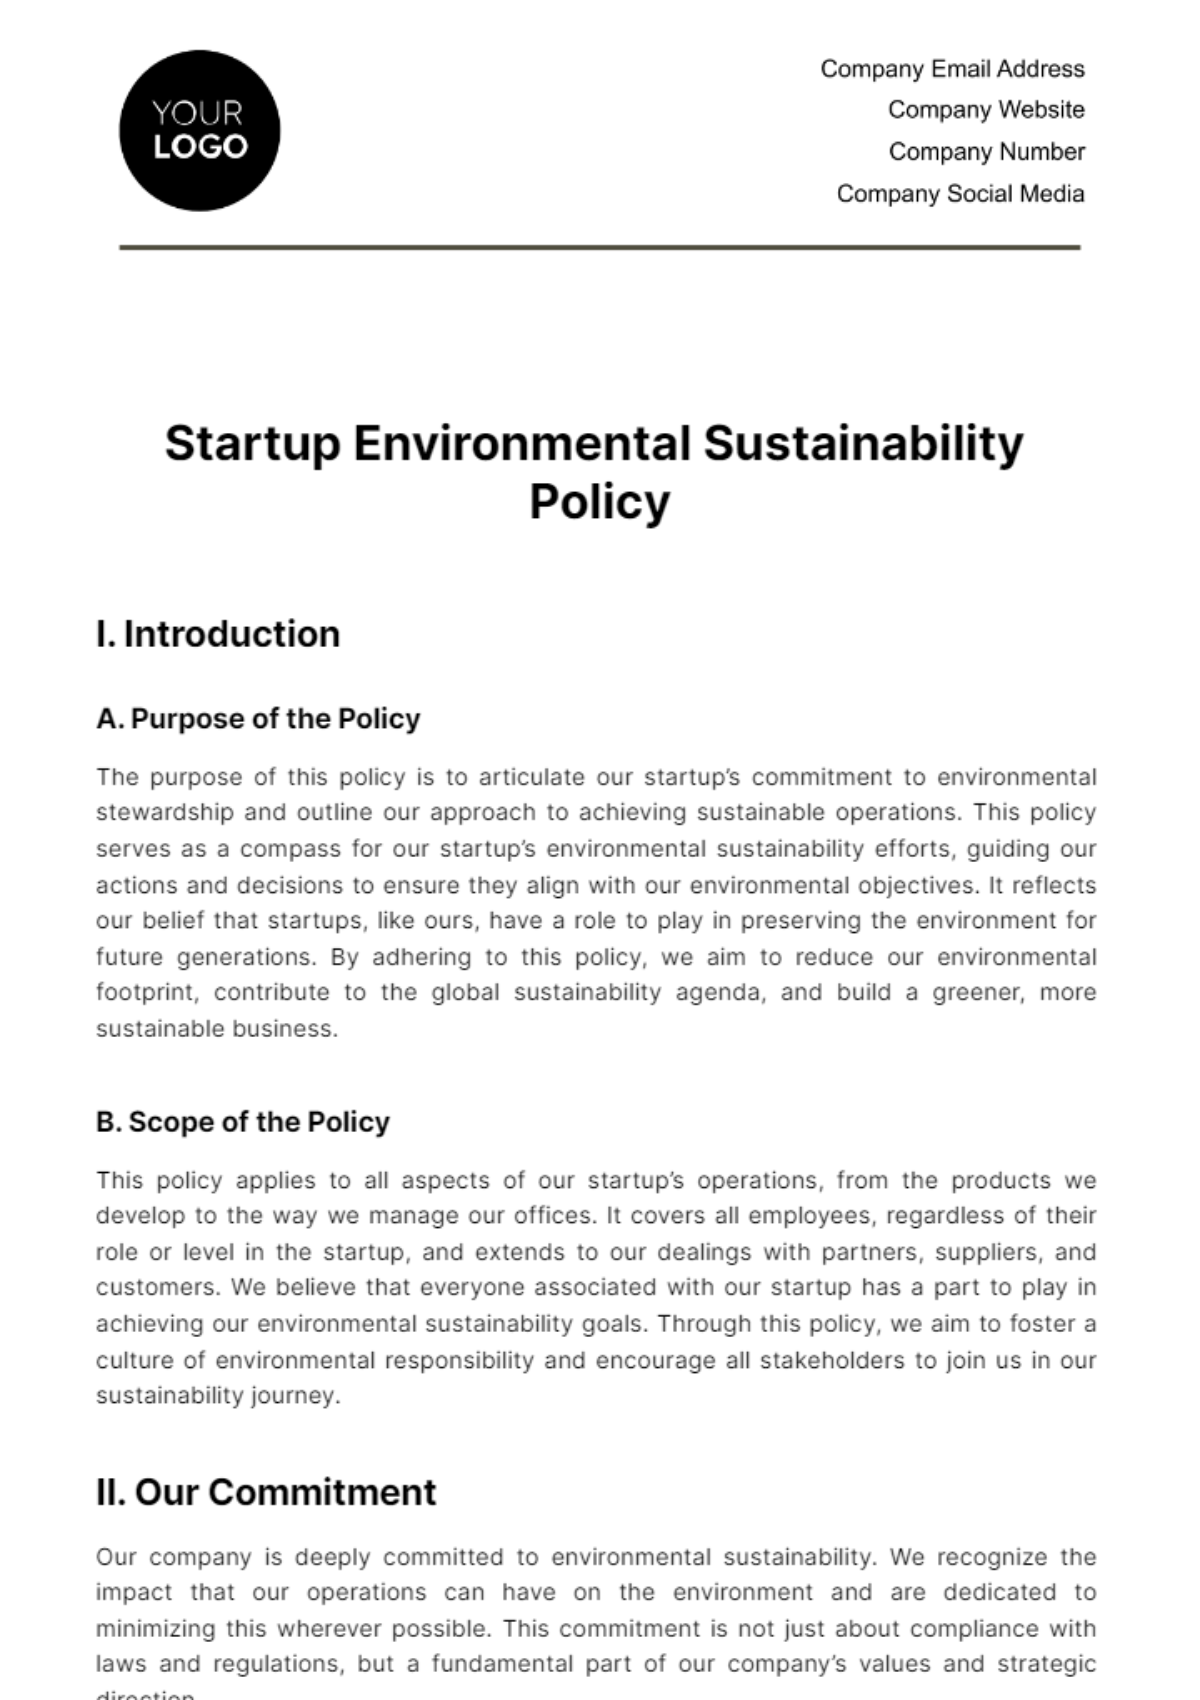 Free Startup Environmental Sustainability Policy Template